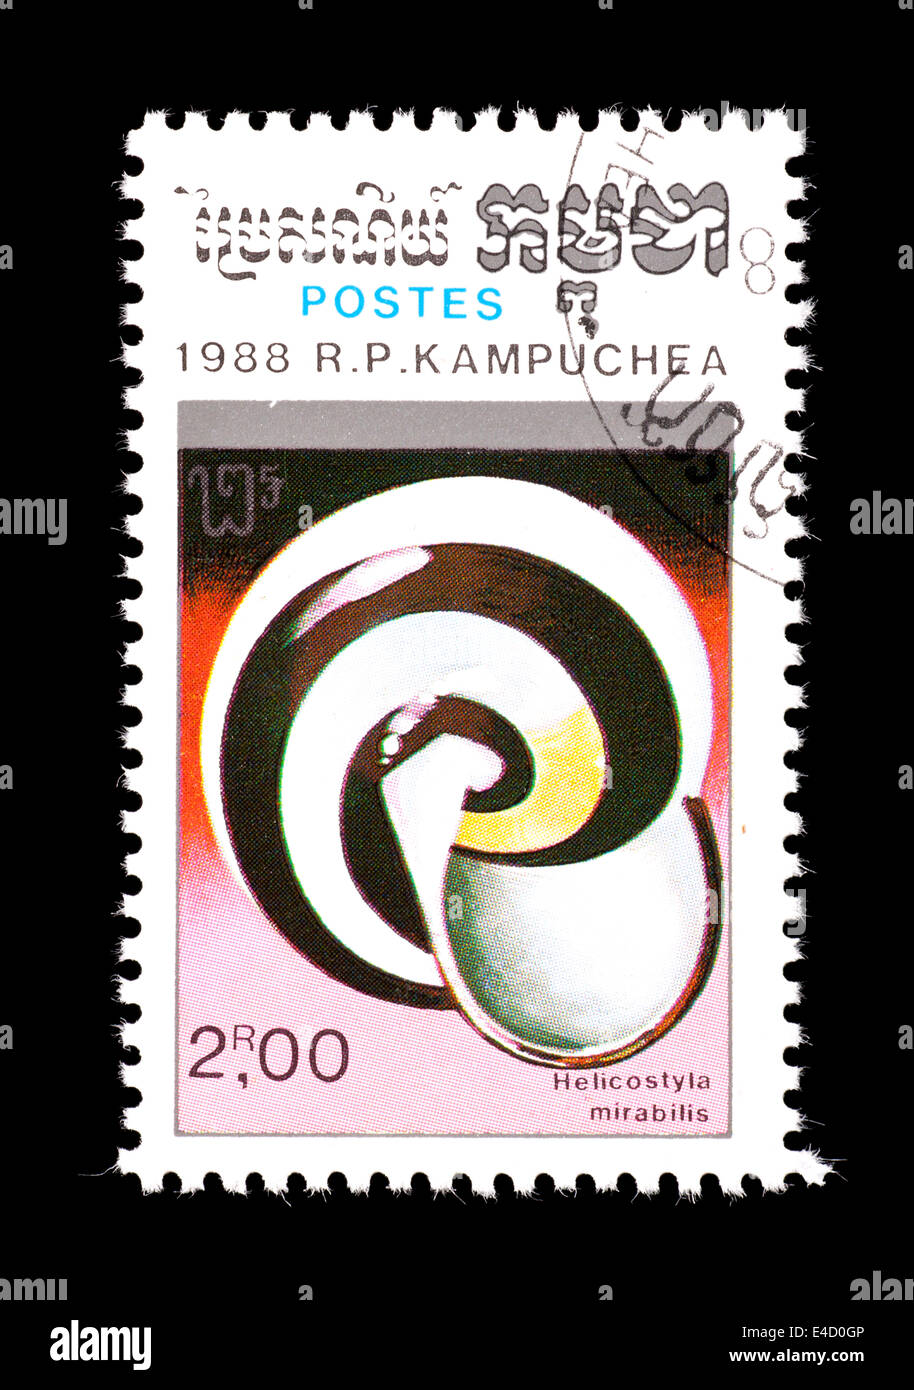 Postage stamp from Cambodia (Kampuchea) depicting a small land snail shell  (Helicostyla mirabillis) Stock Photo